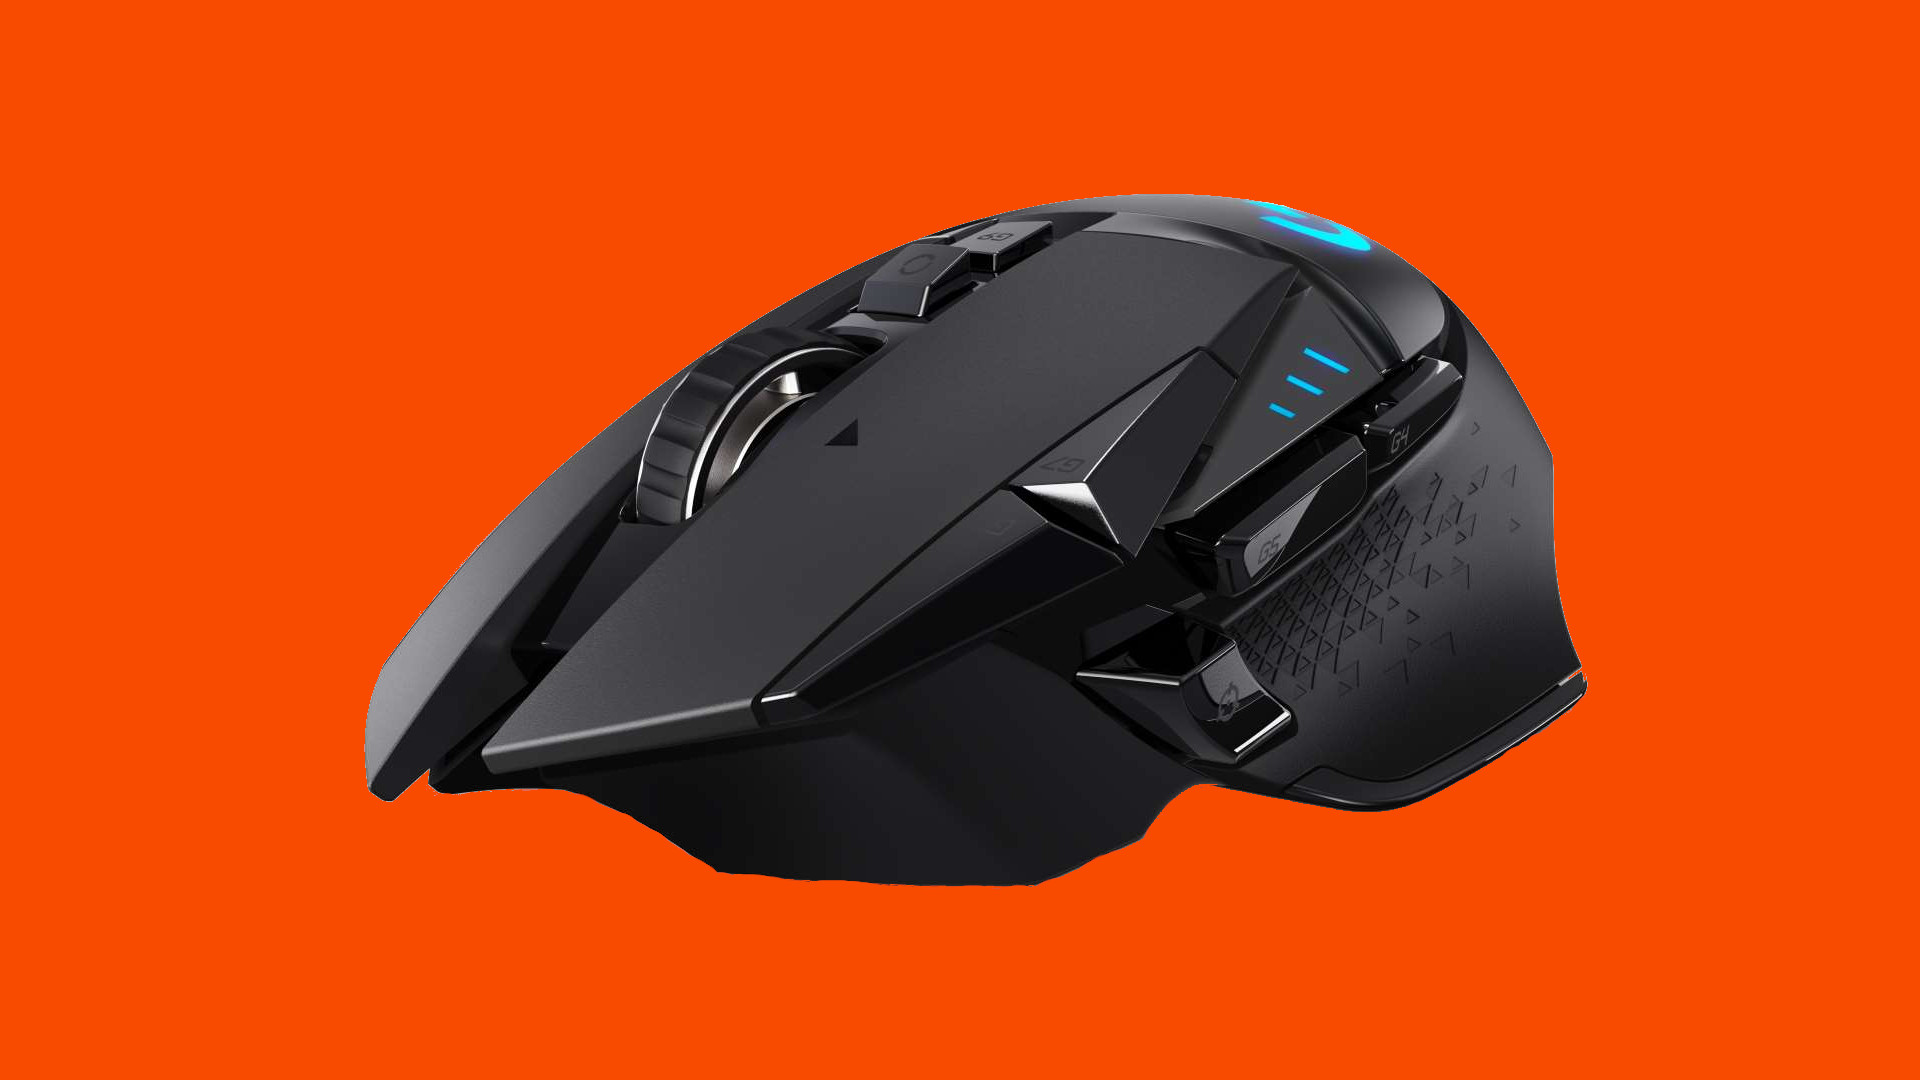 Grab the Logitech G502 Lightspeed for under $95 in an unmissable deal